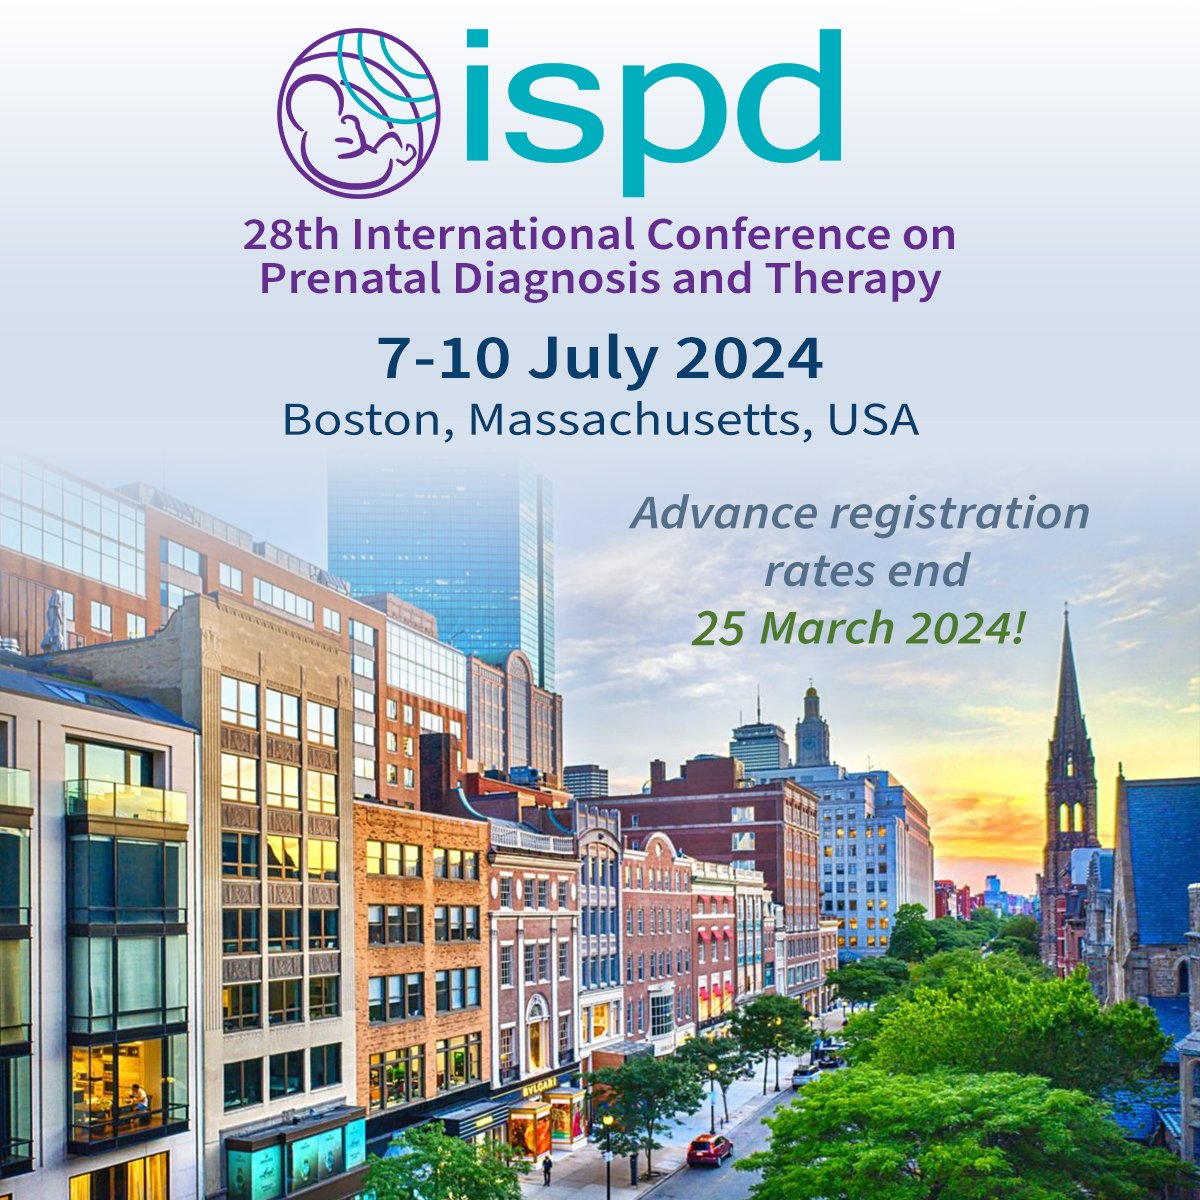 Register THIS WEEK for the best rates for #ISPD2024 in Boston! Preliminary program details are now available including debate topics and plenary sessions on #genomoics, #fetaltherapy, #DNAsequencing and more. Join us: bit.ly/48jr8jJ